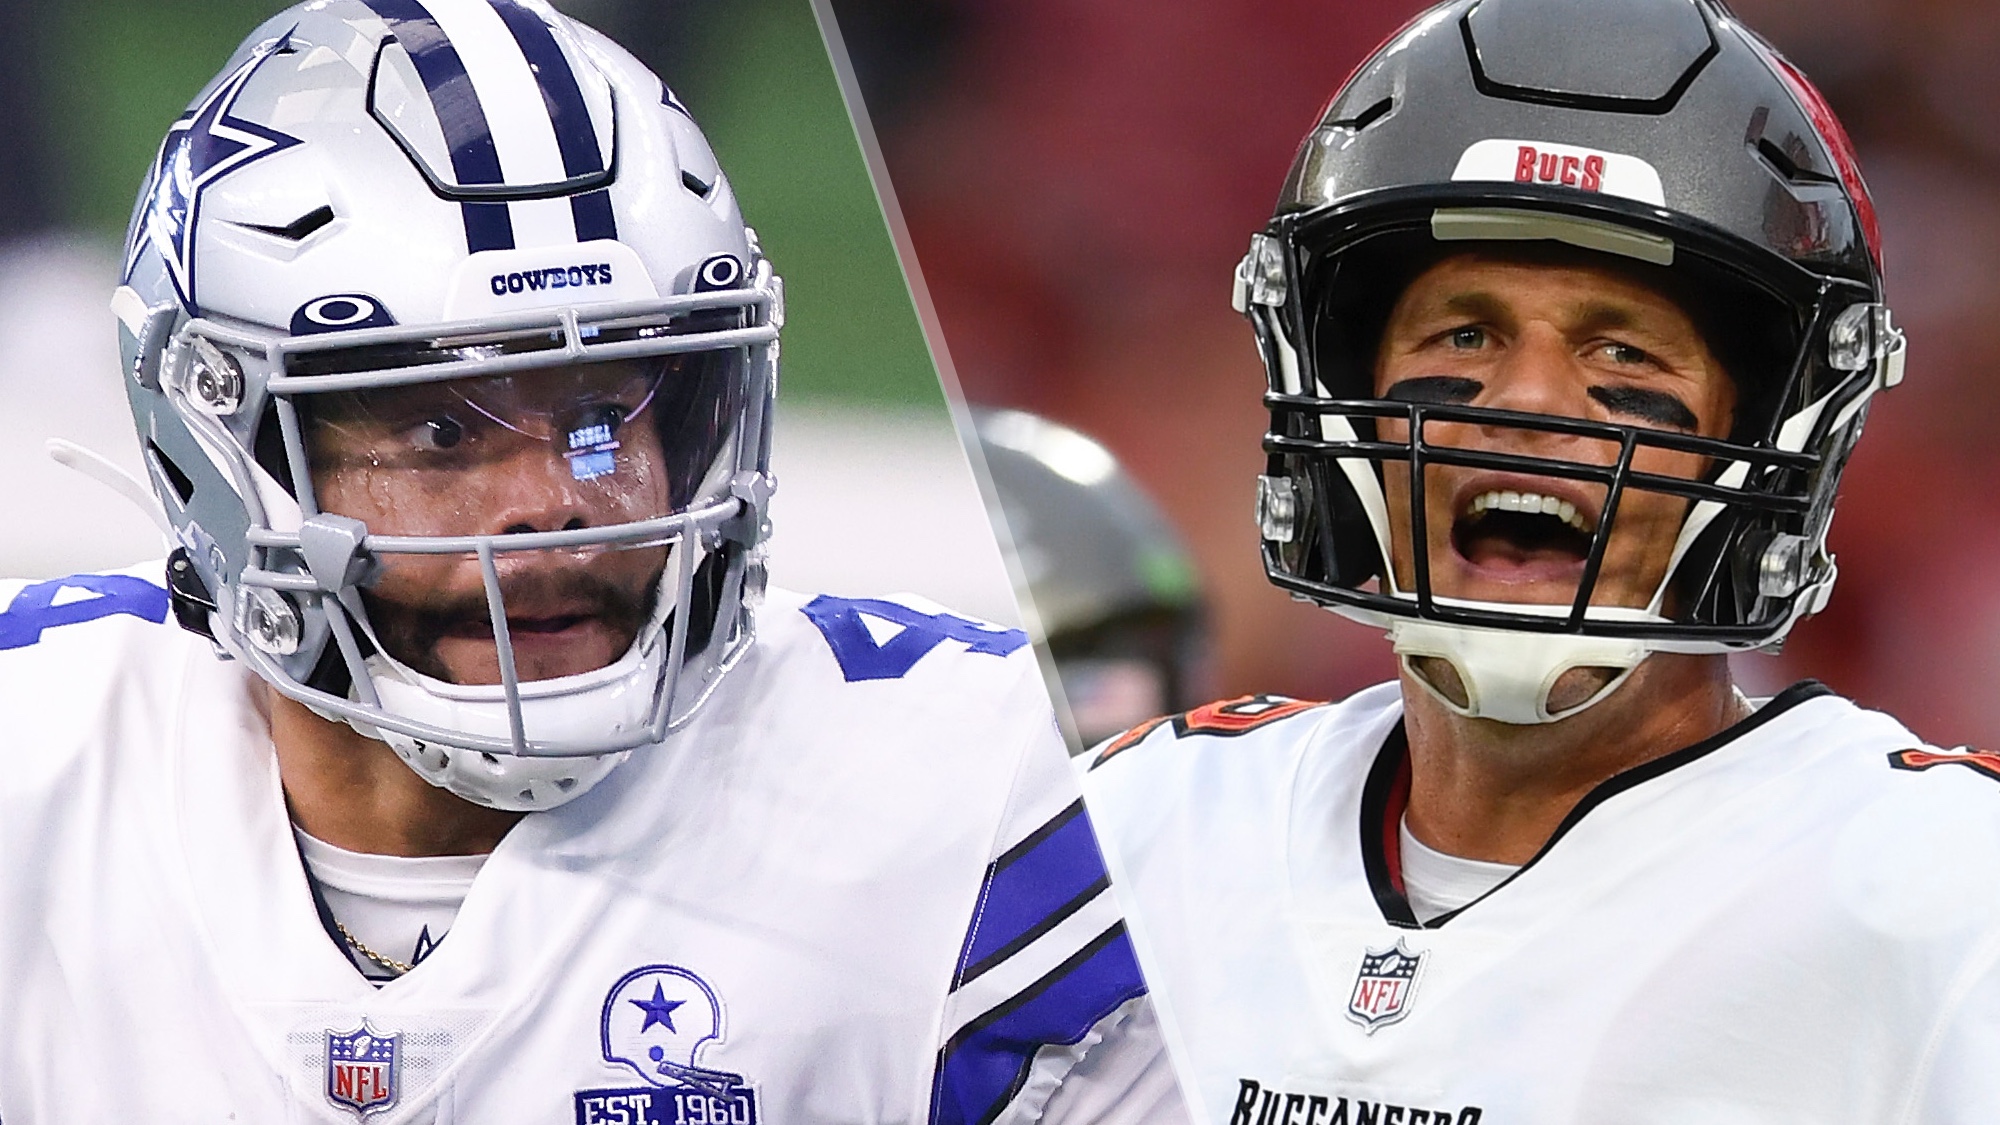 Cowboys vs Buccaneers live stream — how to watch Thursday Night Football